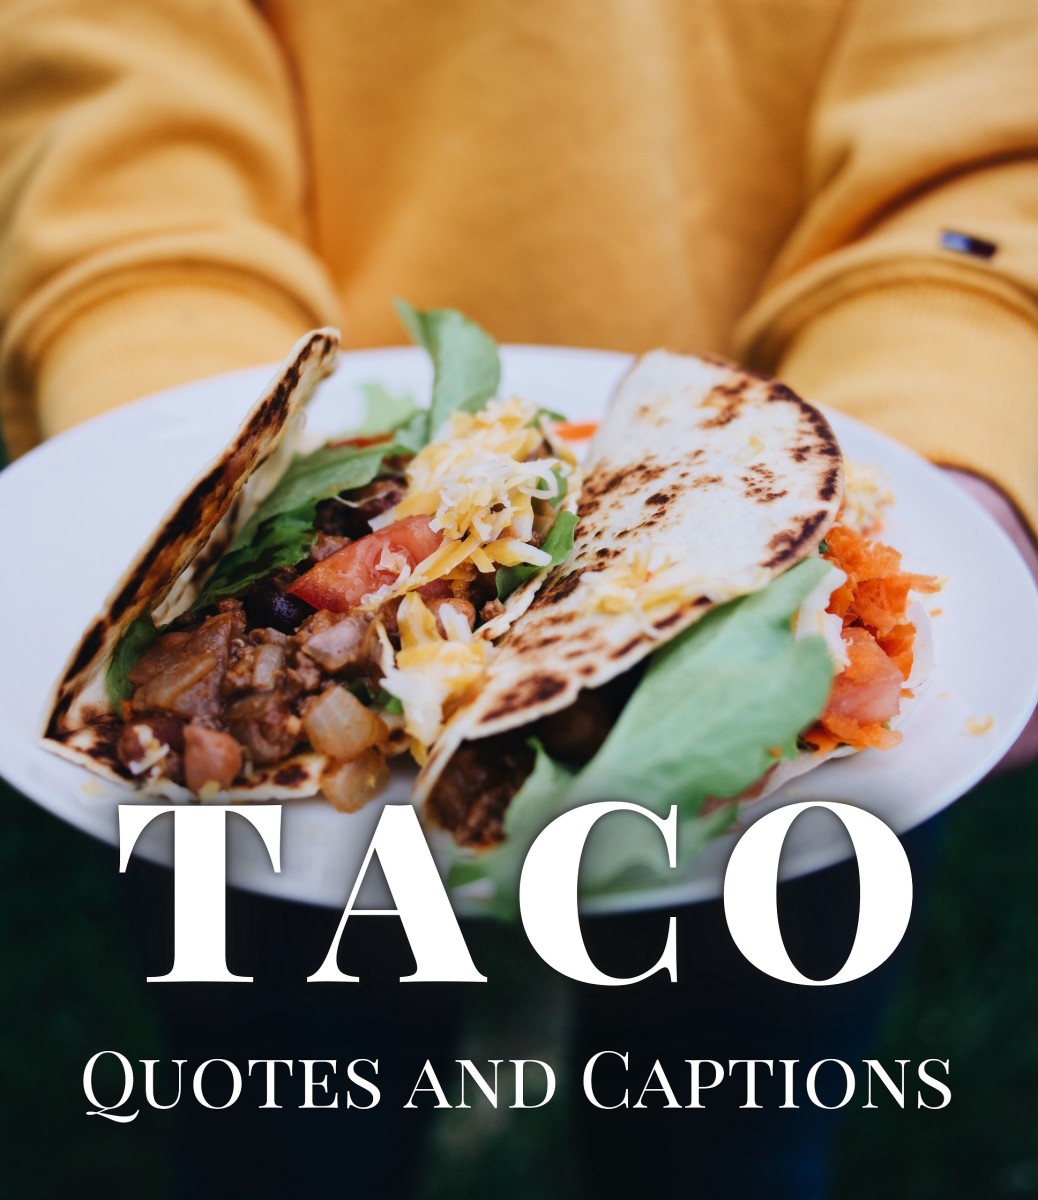 150+ Taco Quotes and Caption Ideas for Instagram